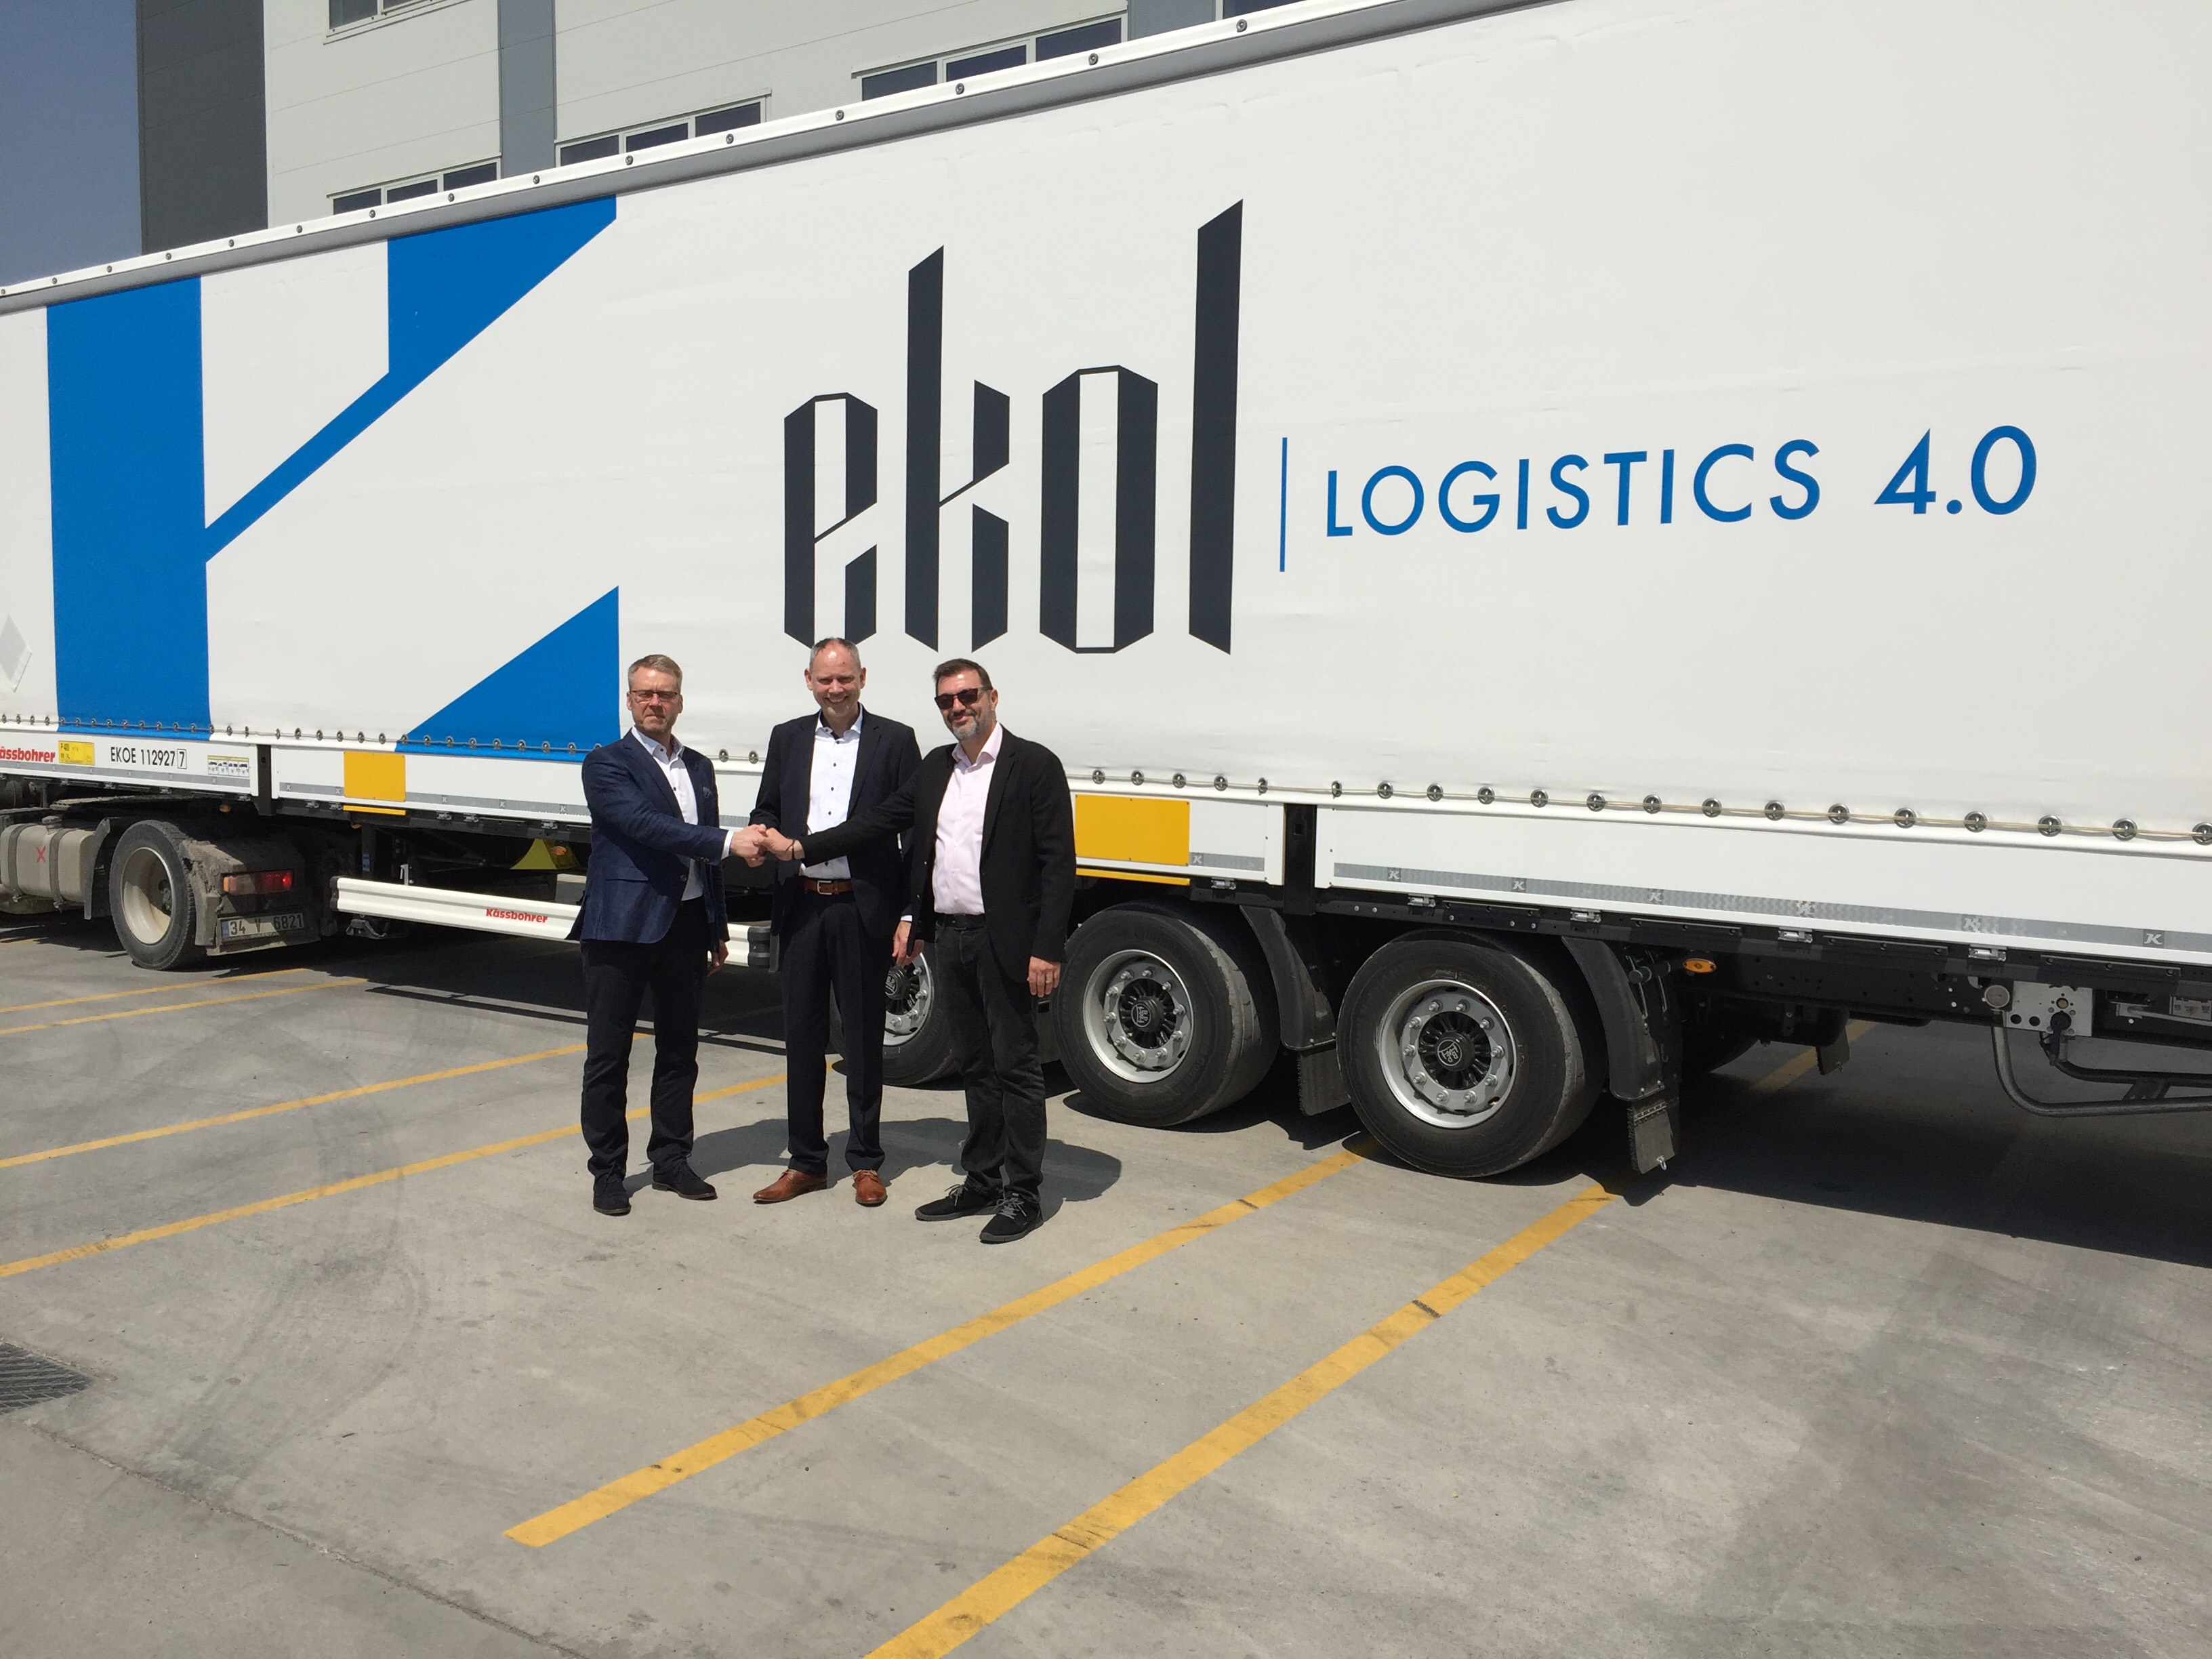 Ekol Logistics starts cooperation with Blue Water Shipping